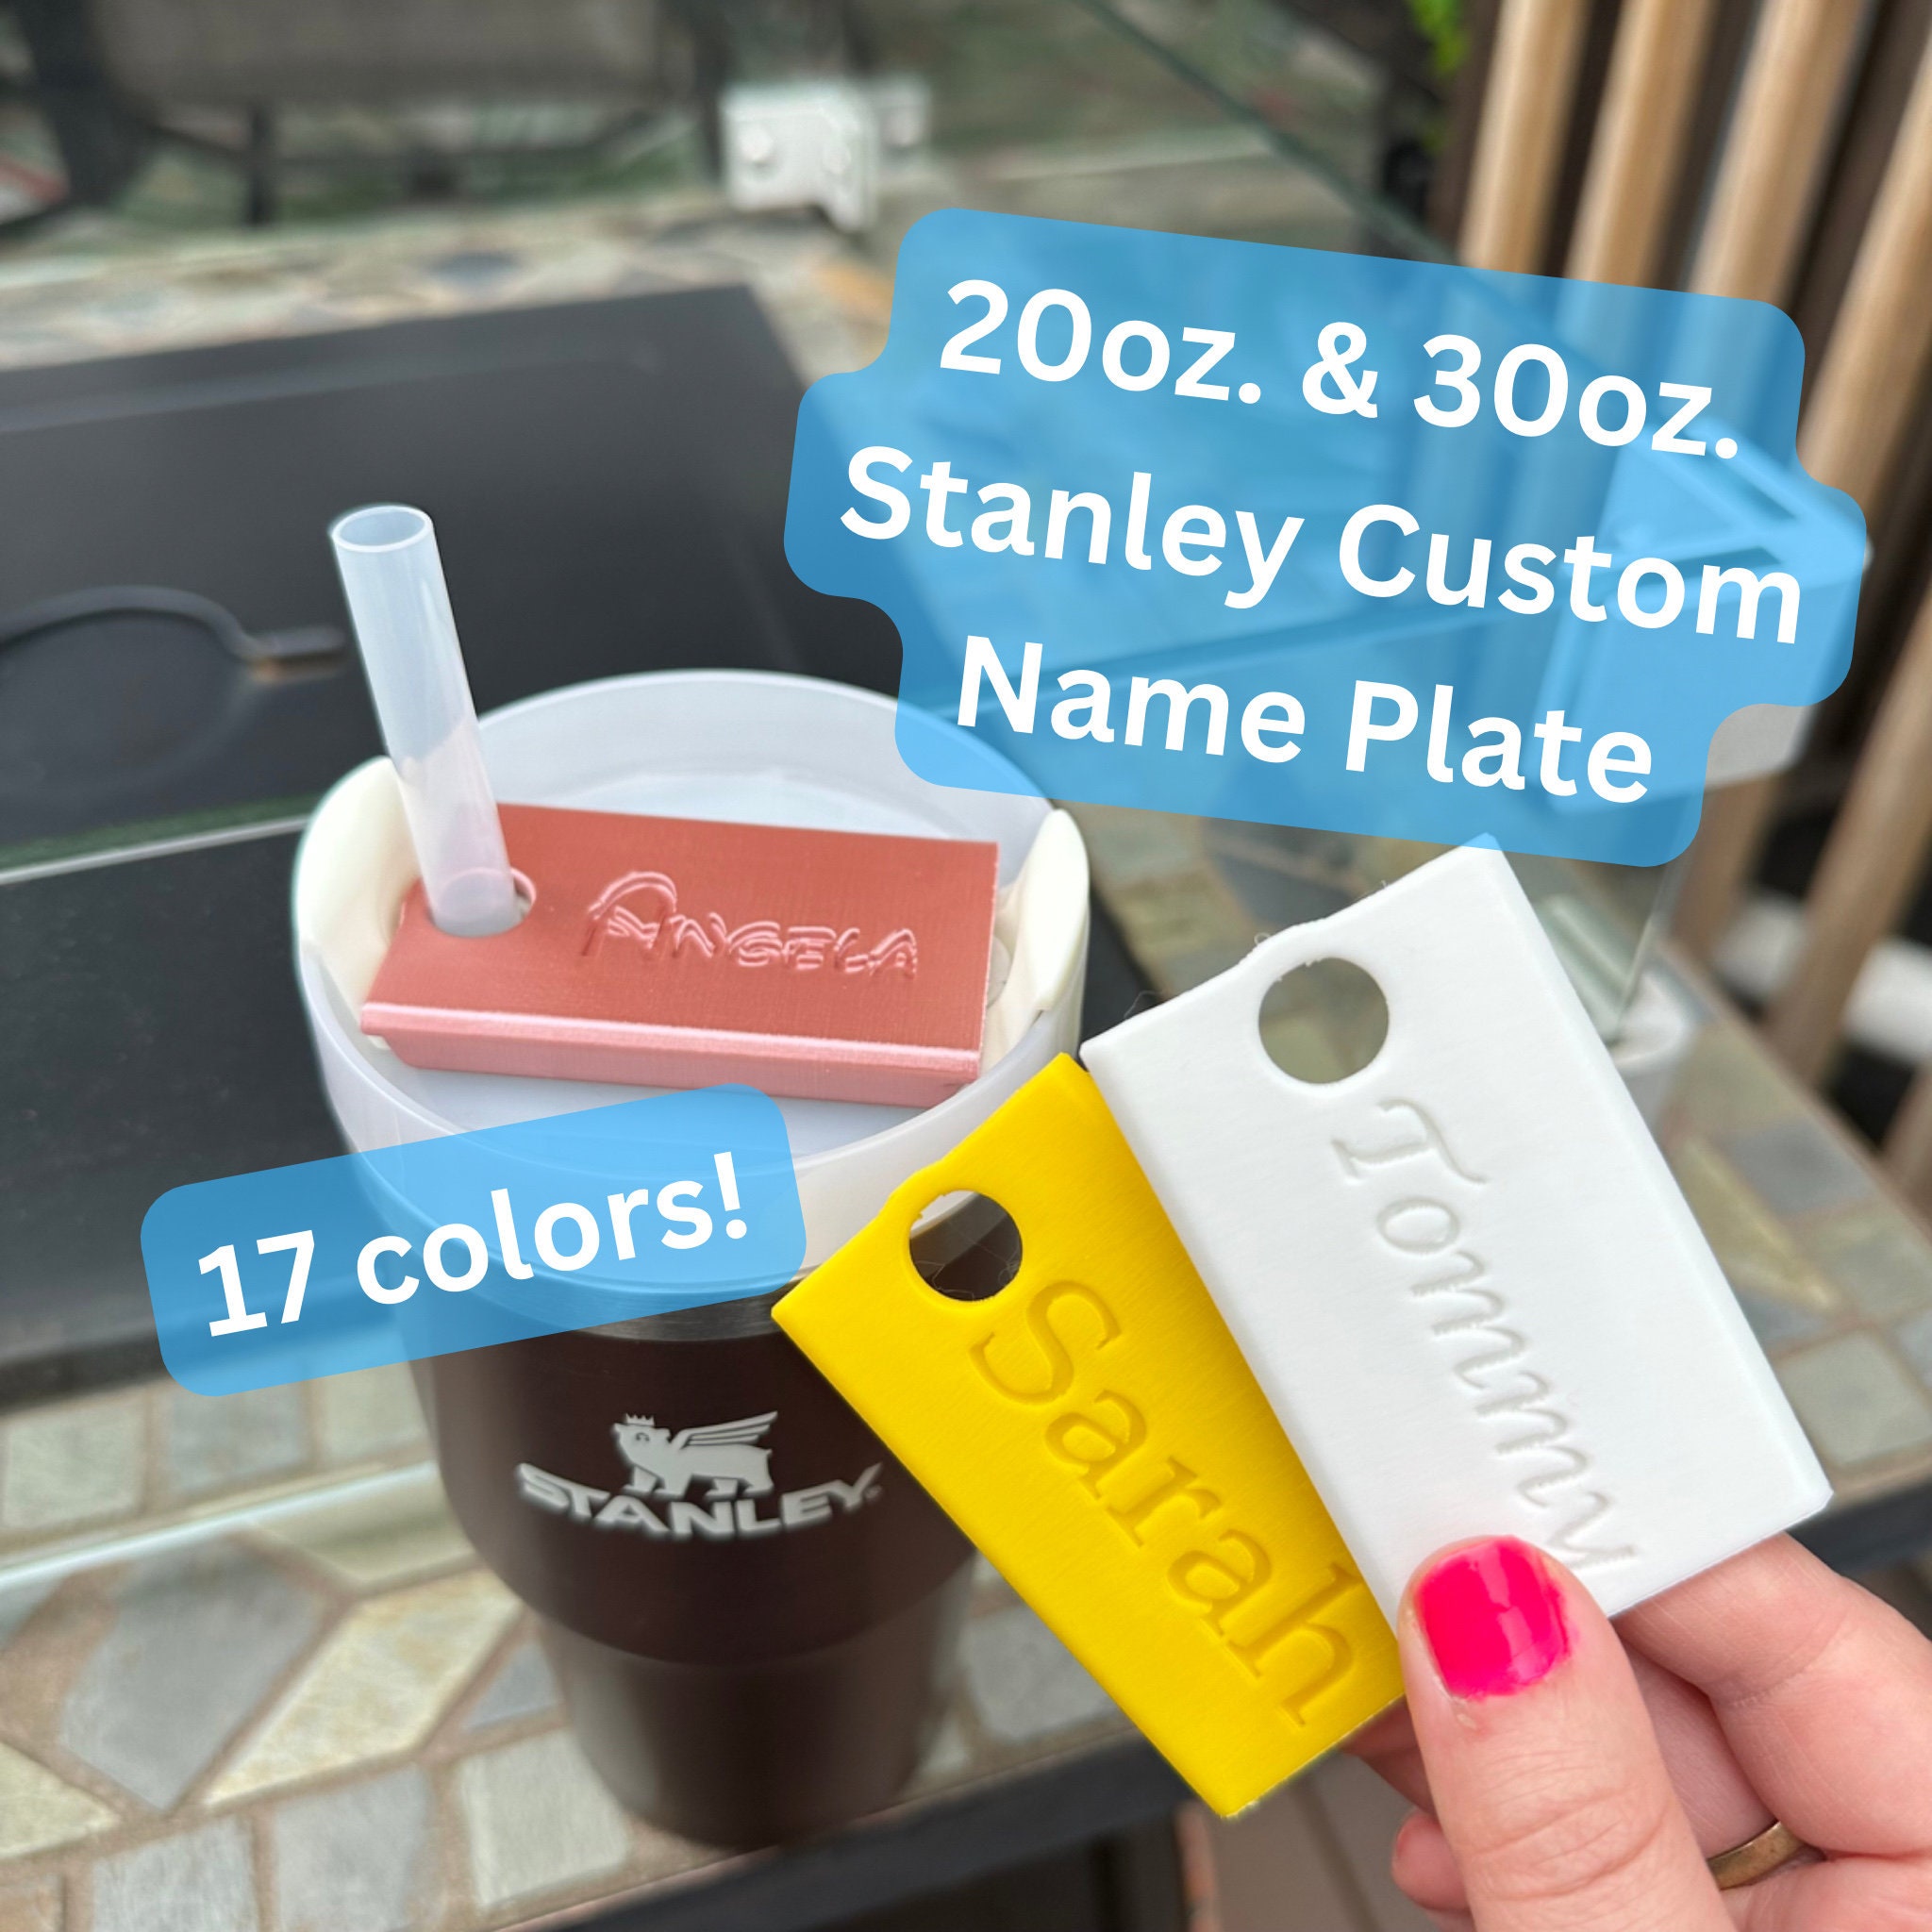 s Custom Stanley Tumbler Name Tags Are a Great Stocking Stuffer –  SheKnows